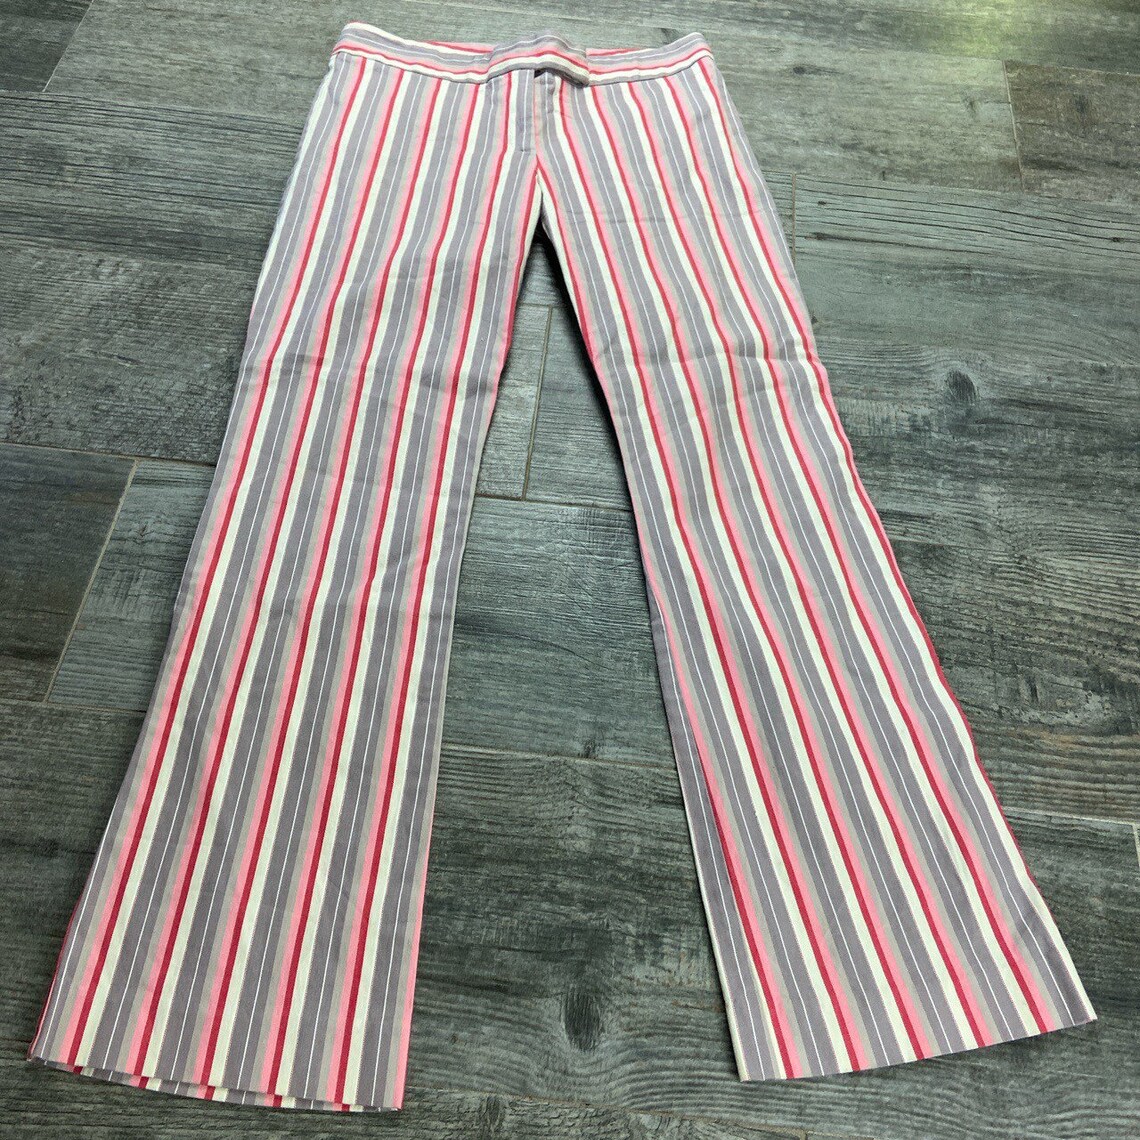 Vintage Y2K low rise striped flare trousers pants by laundry | Etsy